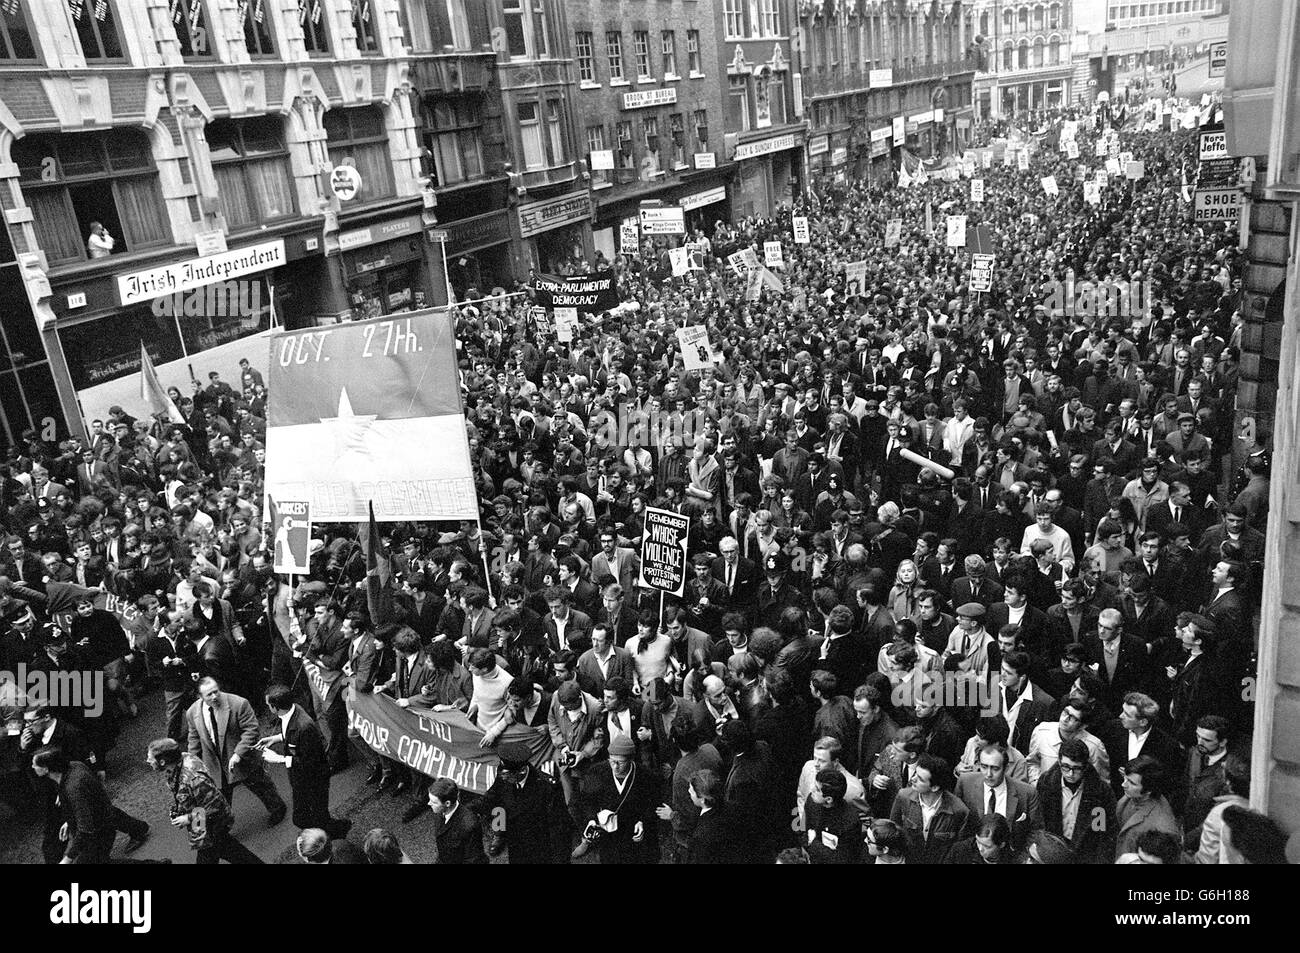 27TH OCTOBER: ON THIS DAY IN 1968 A PEACEFUL ANTI-WAR MARCH TURNED INTO A MAJOR RIOT PA NEWS PHOTO 27/10/68 A SOLID MASS OF MARCHERS IN PROTEST AT FLEET STREET, LONDON FOR THE ANTI VIETNAM WAR DEMONSTRATION Stock Photo